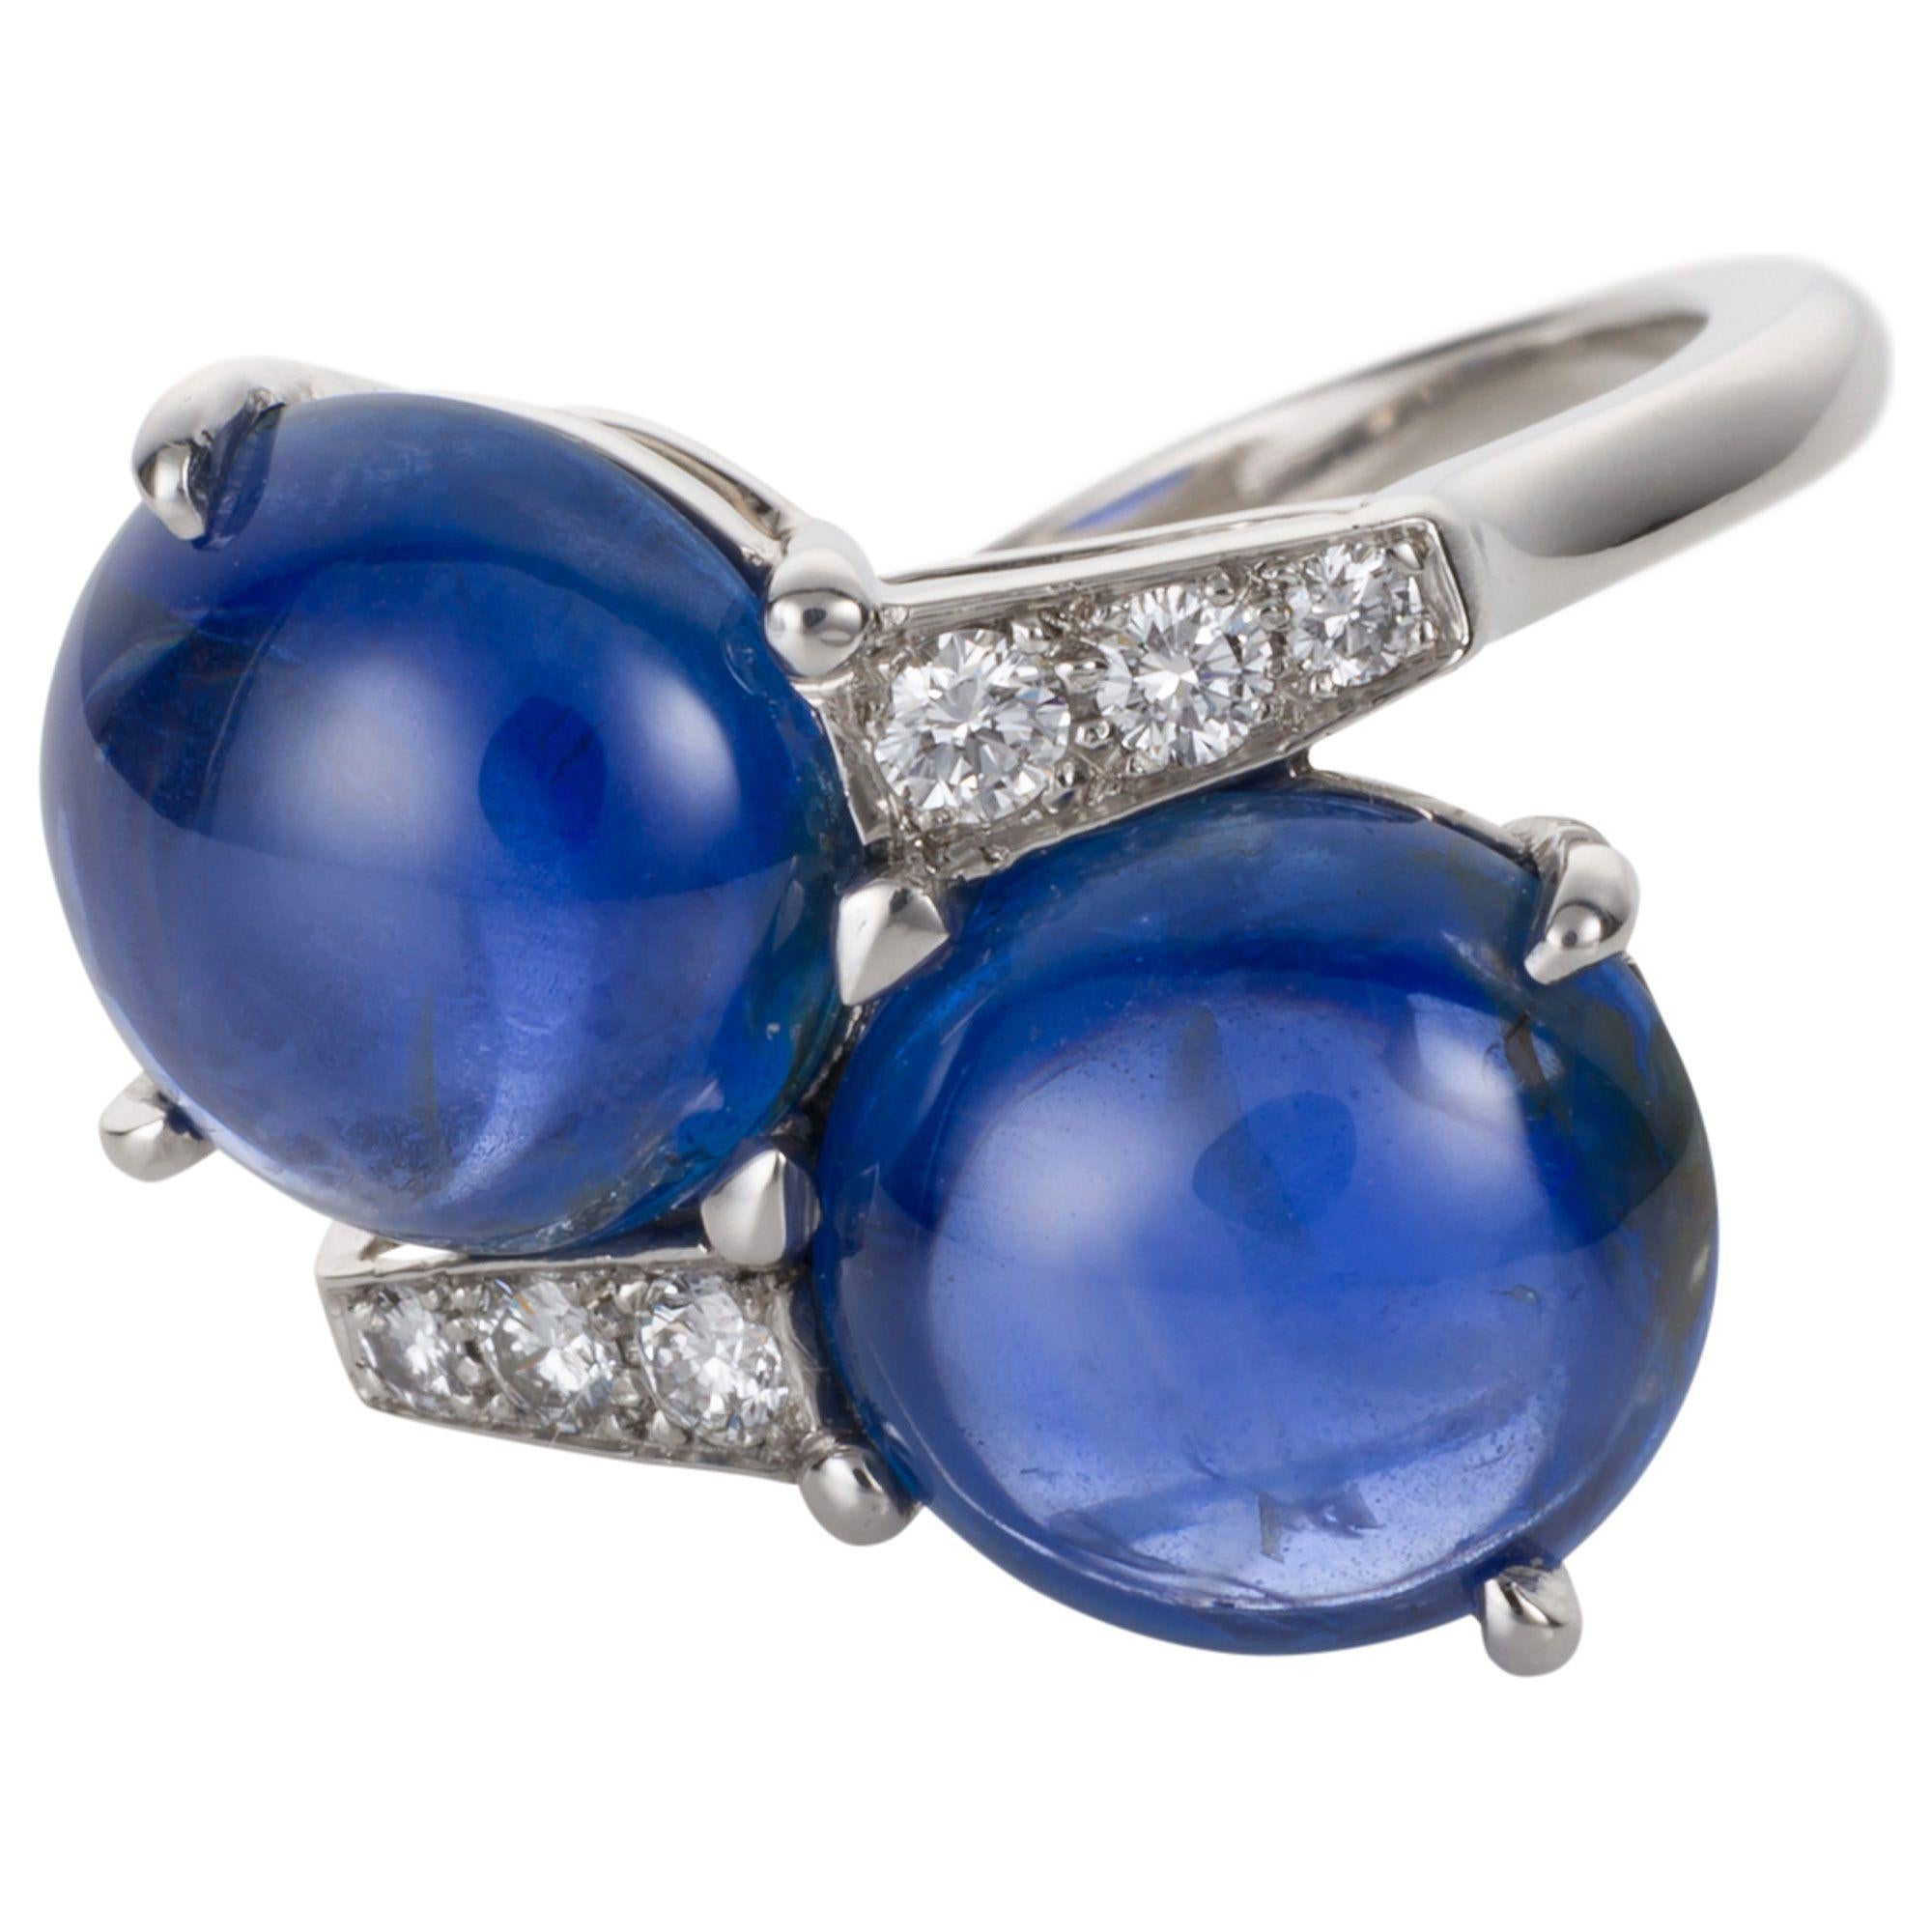 Absolutely incredible, these sapphires are a stand out and so difficult to find these days. American Gemological Laboratories have certified the two sapphires as natural corundum - blue sapphire, provenance Burma (Myanmar) unheated, cutting style -